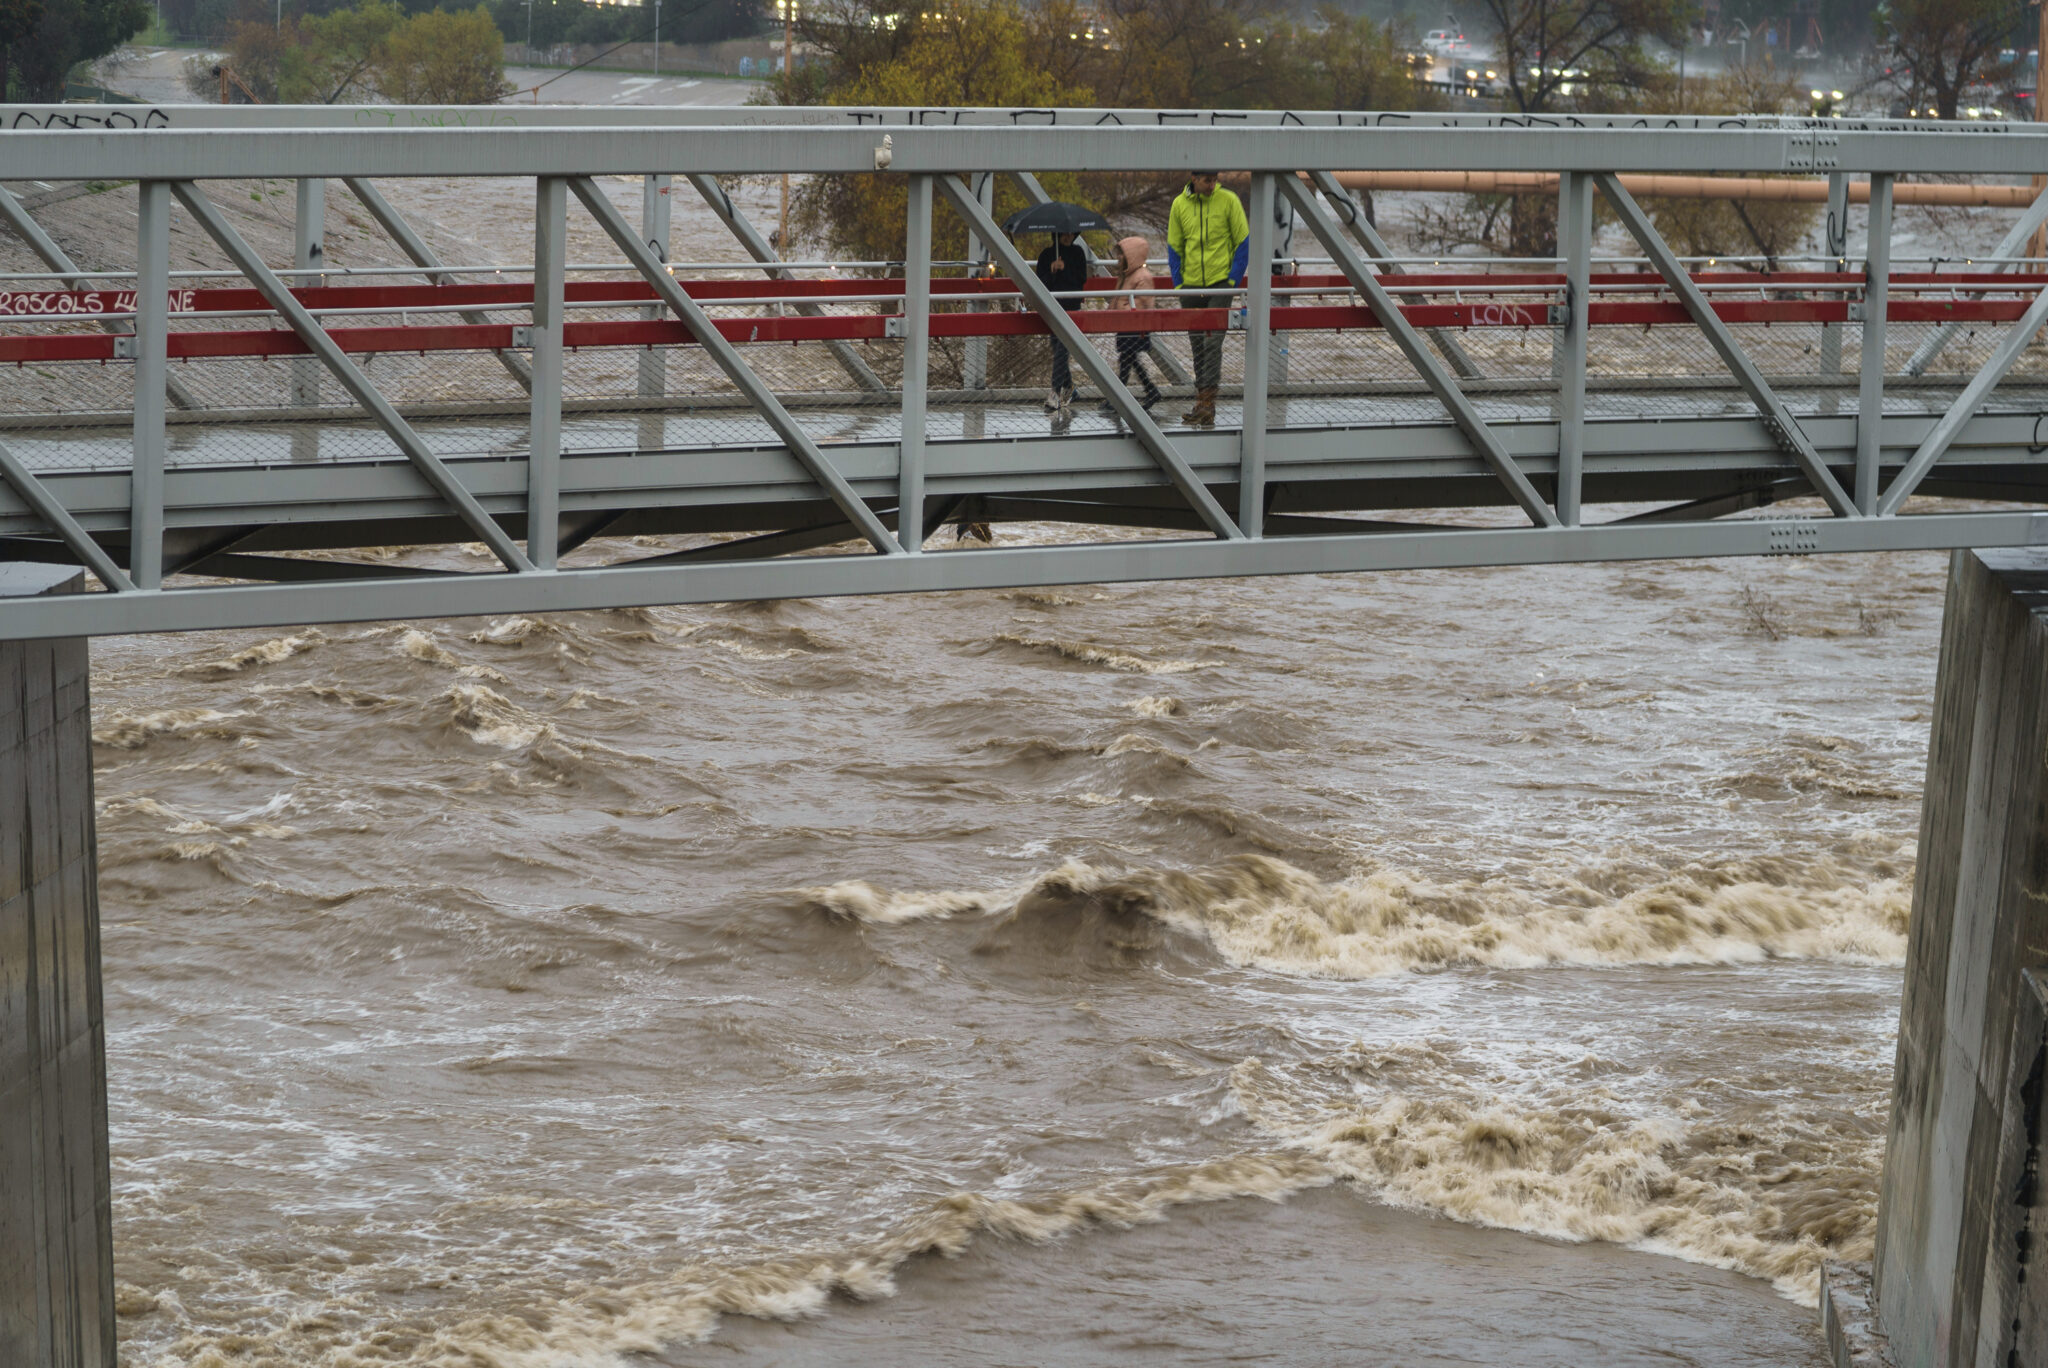 People cross a bridge over a swollen Los Angeles River in Los Angeles on Saturday, Jan. 14, 2023. Storm-battered California got more wind, rain and snow on Saturday, raising flooding concerns, causing power outages and making travel dangerous. (AP Photo/Damian Dovarganes)